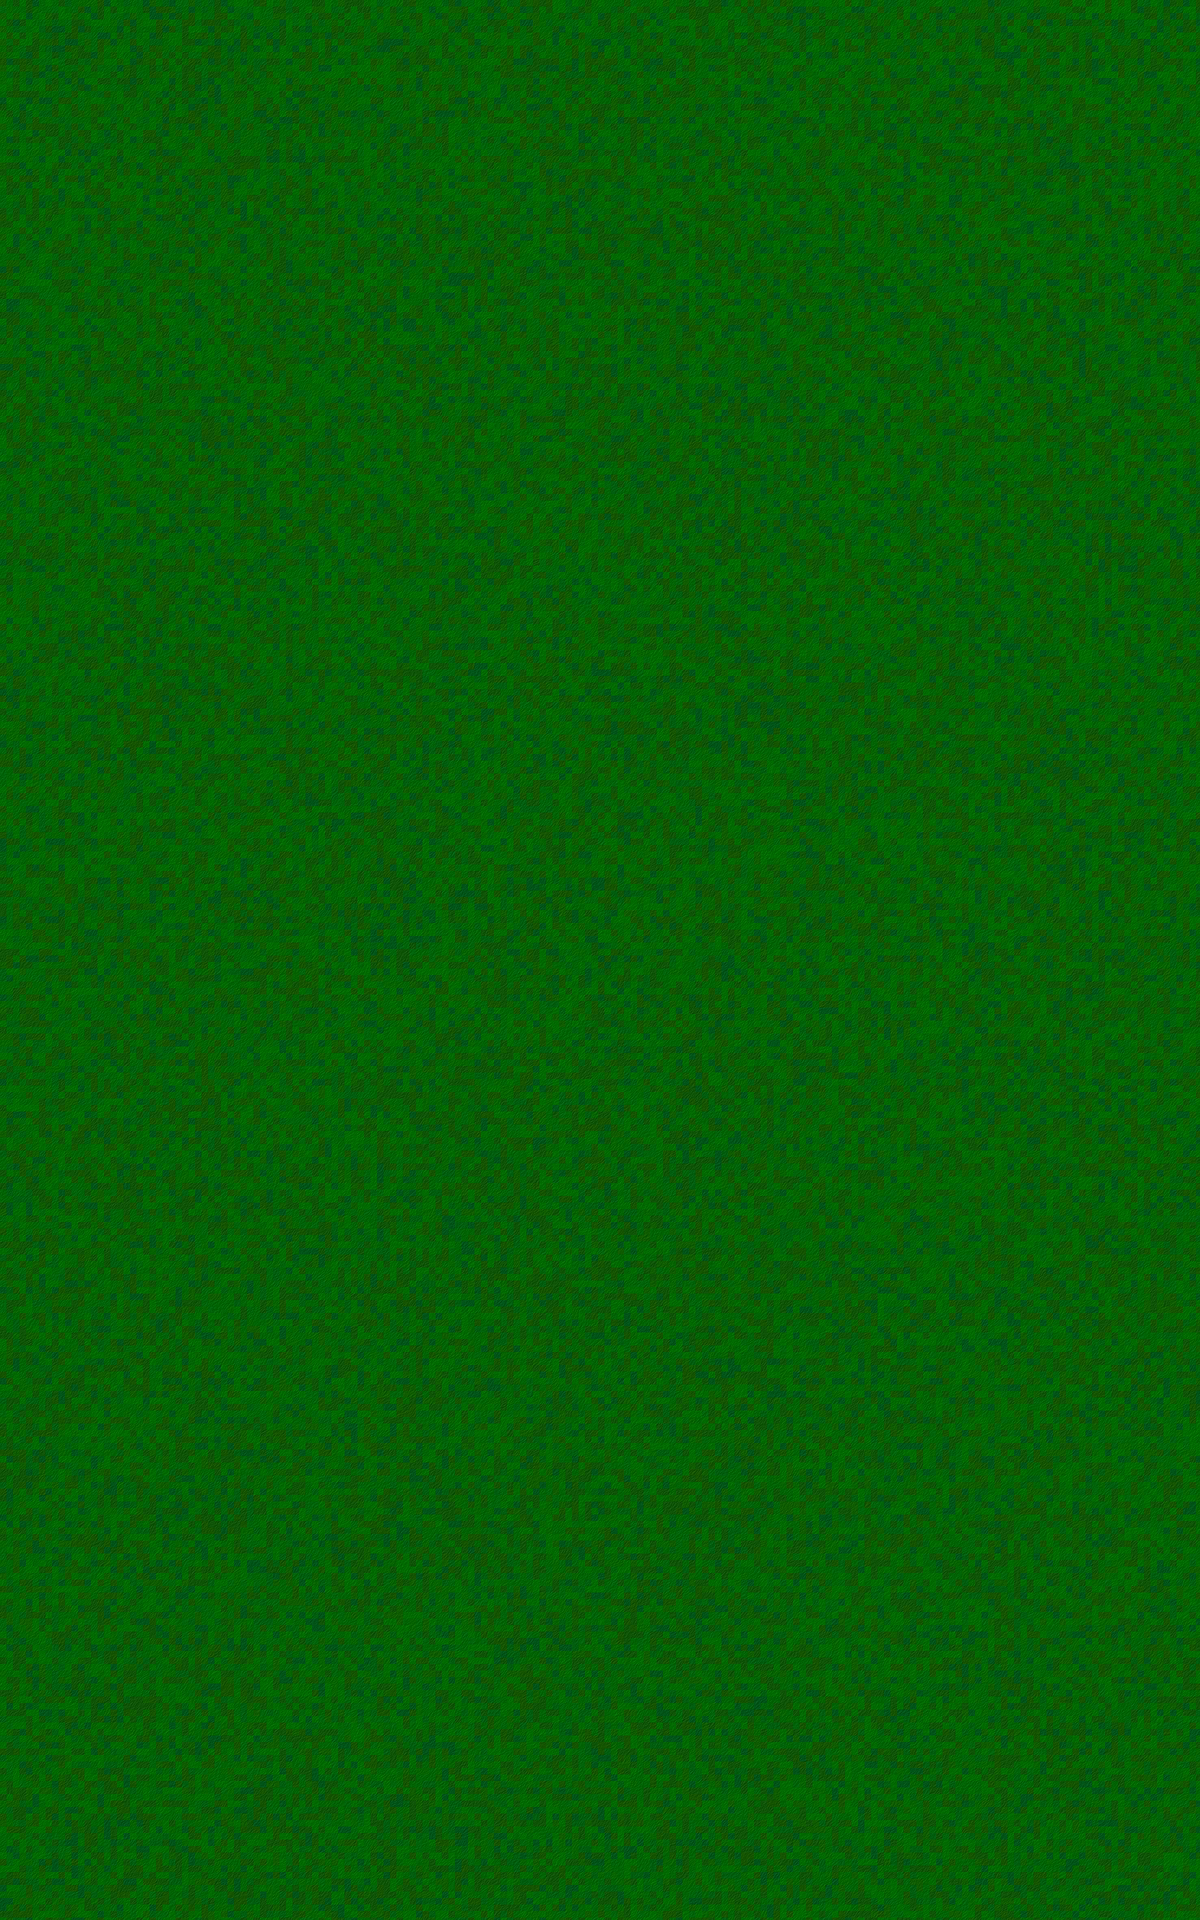 General 1200x1920 square green background texture